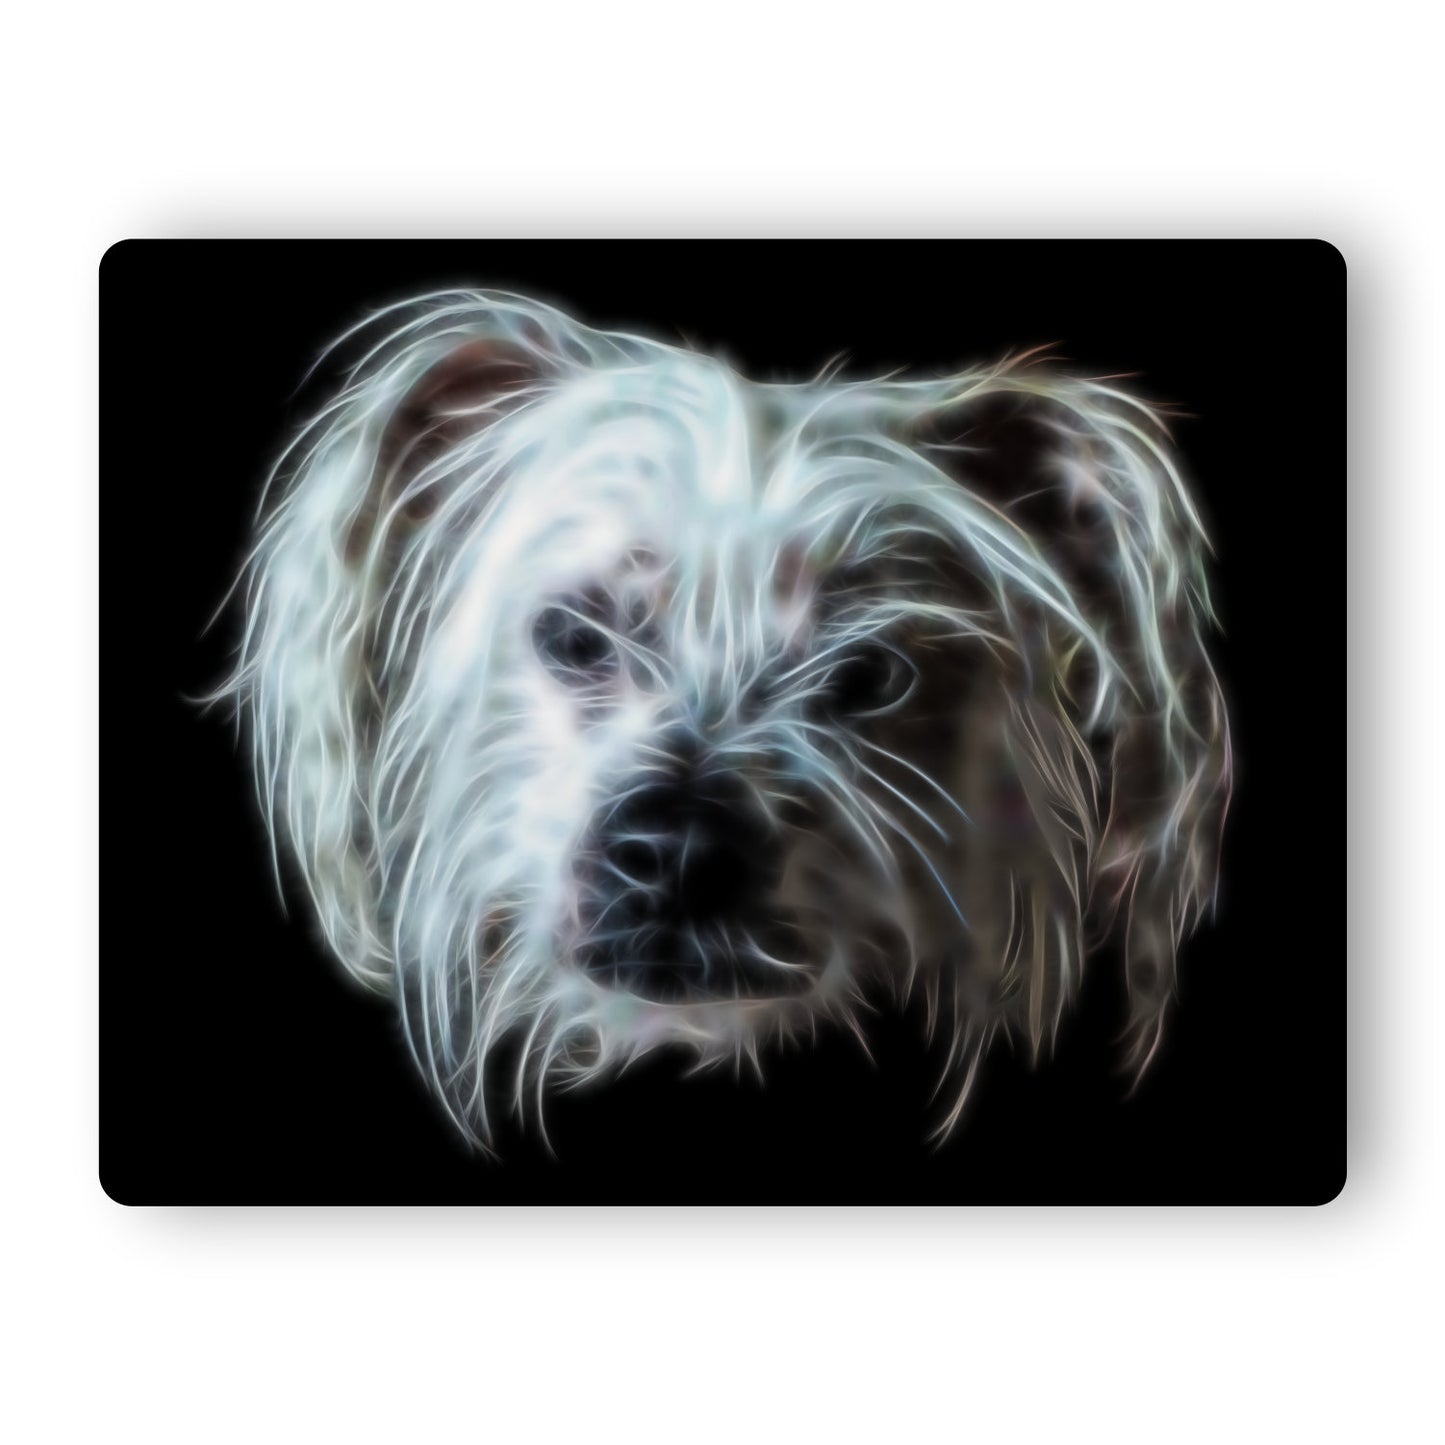 Chinese Crested Dog Aluminium Metal Wall Plaque with Stunning Fractal Art Design.